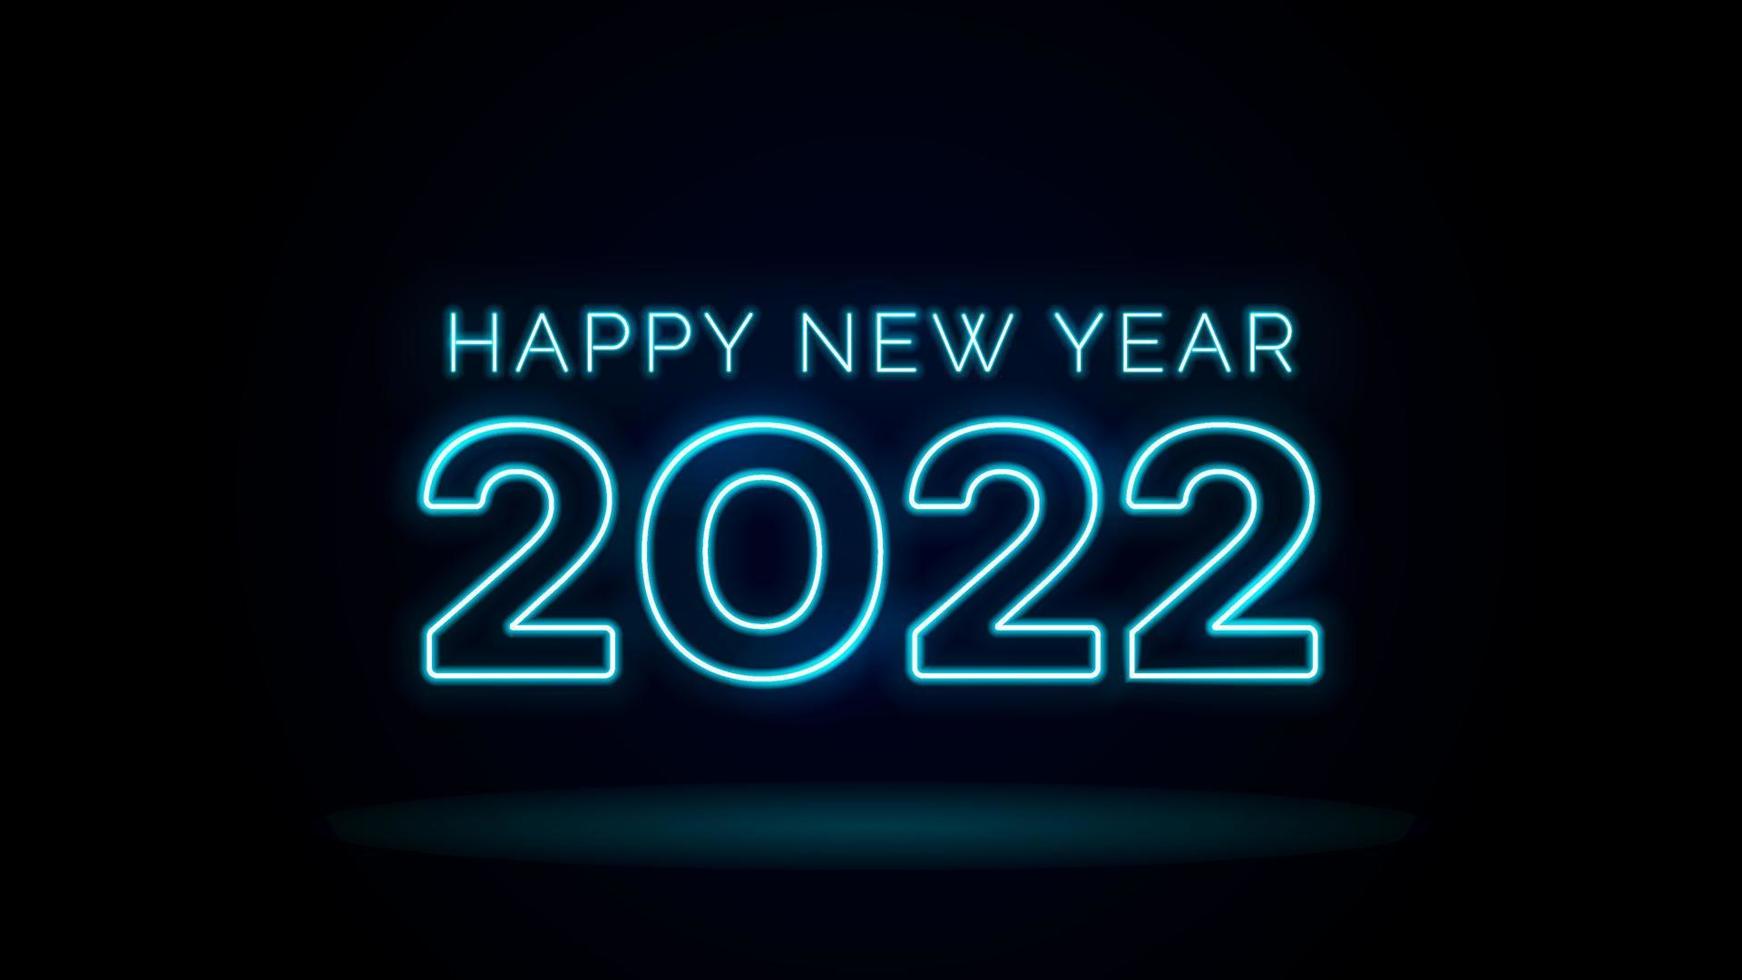 Vector template of glowing neon typography design Happy New Year 2022 in color blue, Holiday celebration decorative LED text sign.